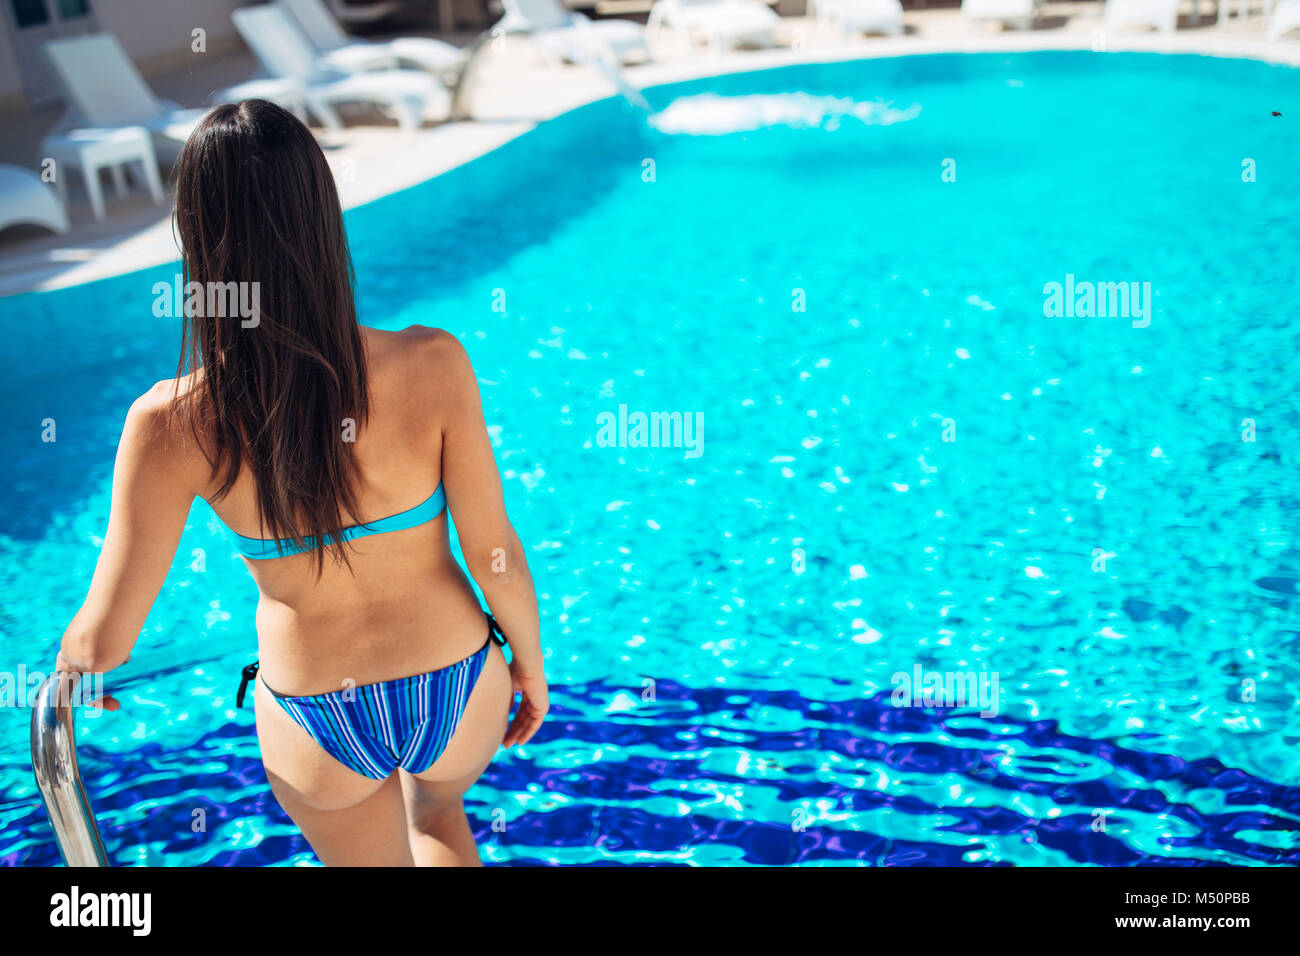 Young Happy Woman In The Black Swimsuit With Shapely Body Near The Swimming  Pool At The Resort With Blurred Background Stock Photo, Picture and Royalty  Free Image. Image 73435109.